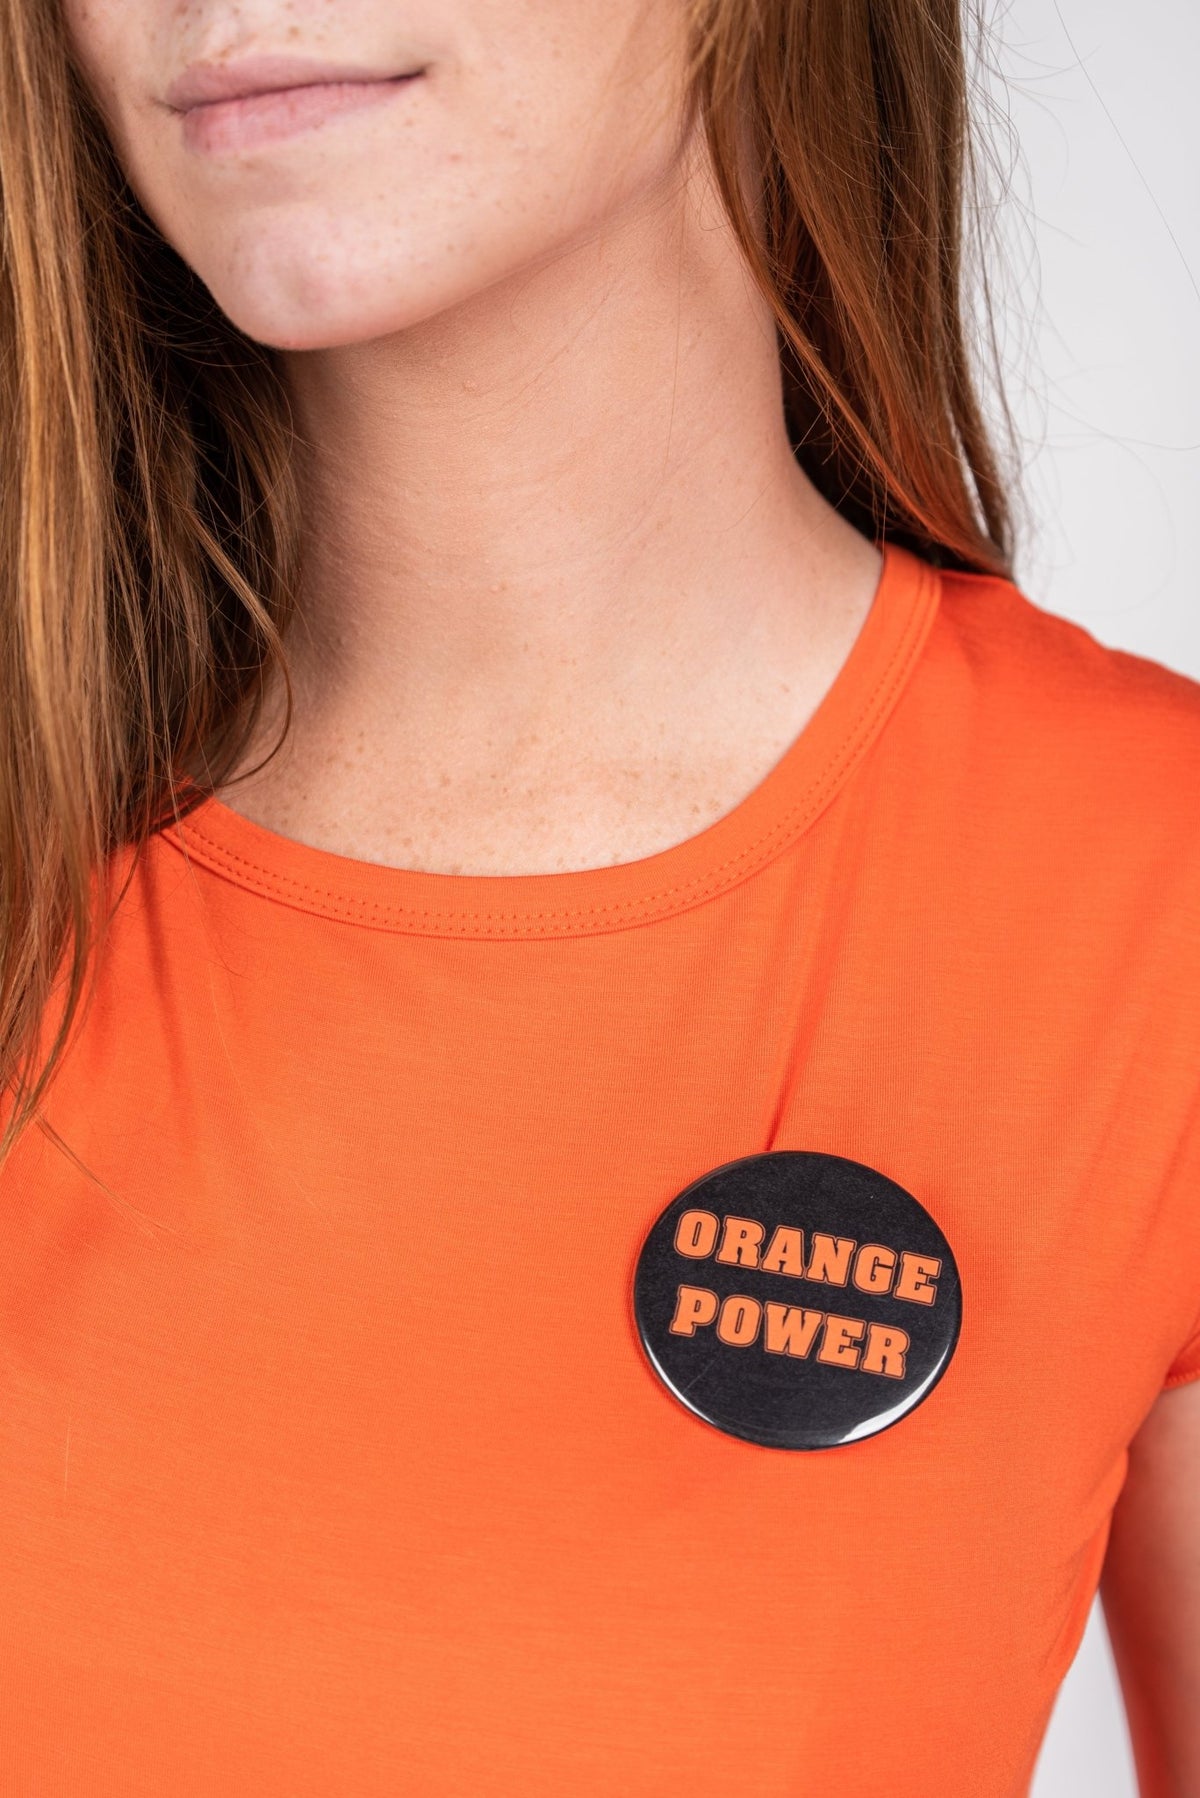 Orange Power 2.5 inch button - Trendy Gifts at Lush Fashion Lounge Boutique in Oklahoma City